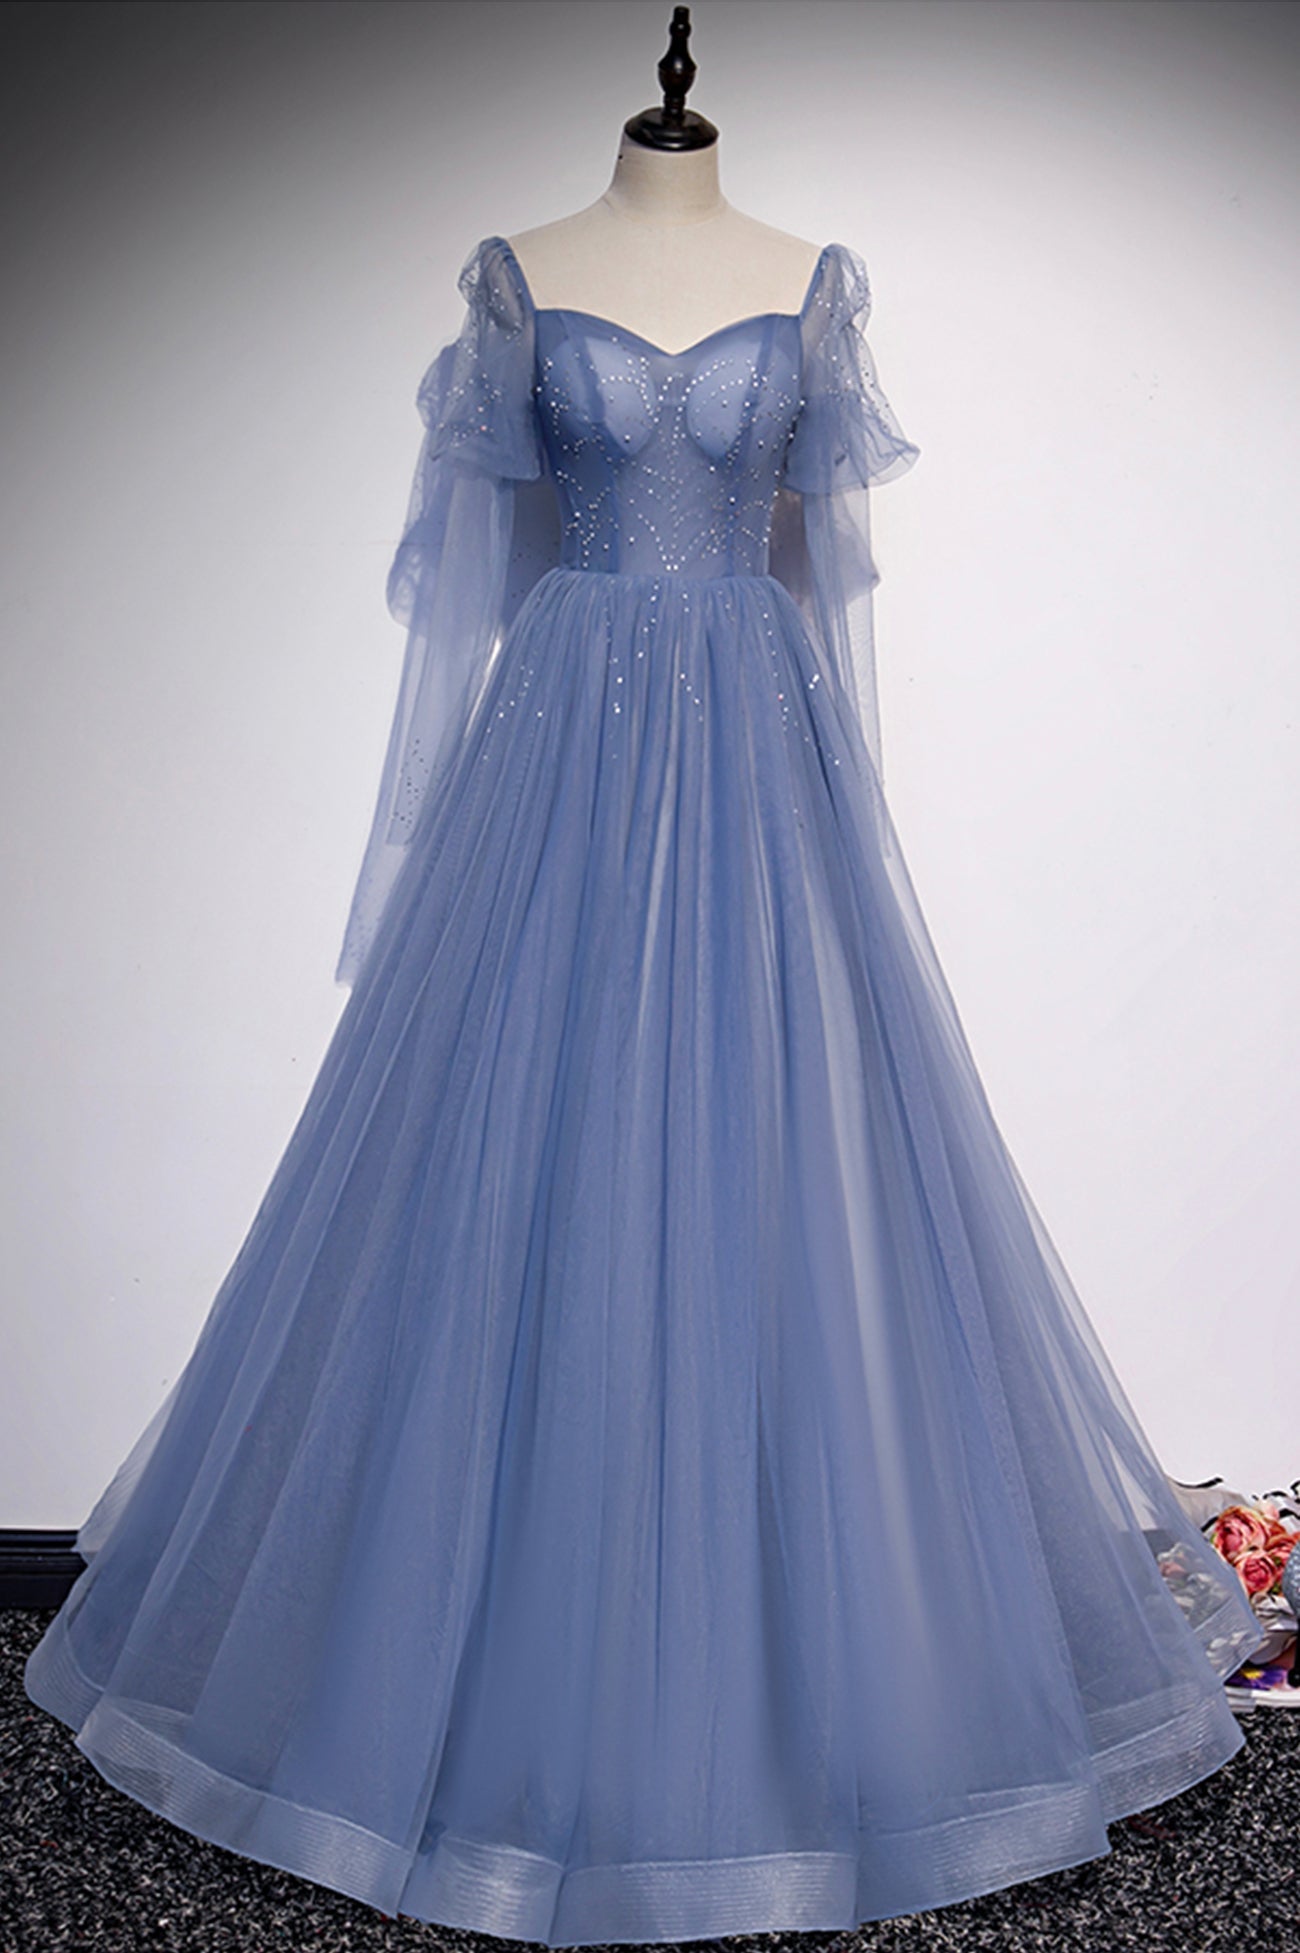 Blue Tulle Long Sleeve Prom Dress Outfits For Girls, A-Line Blue Evening Party Dress